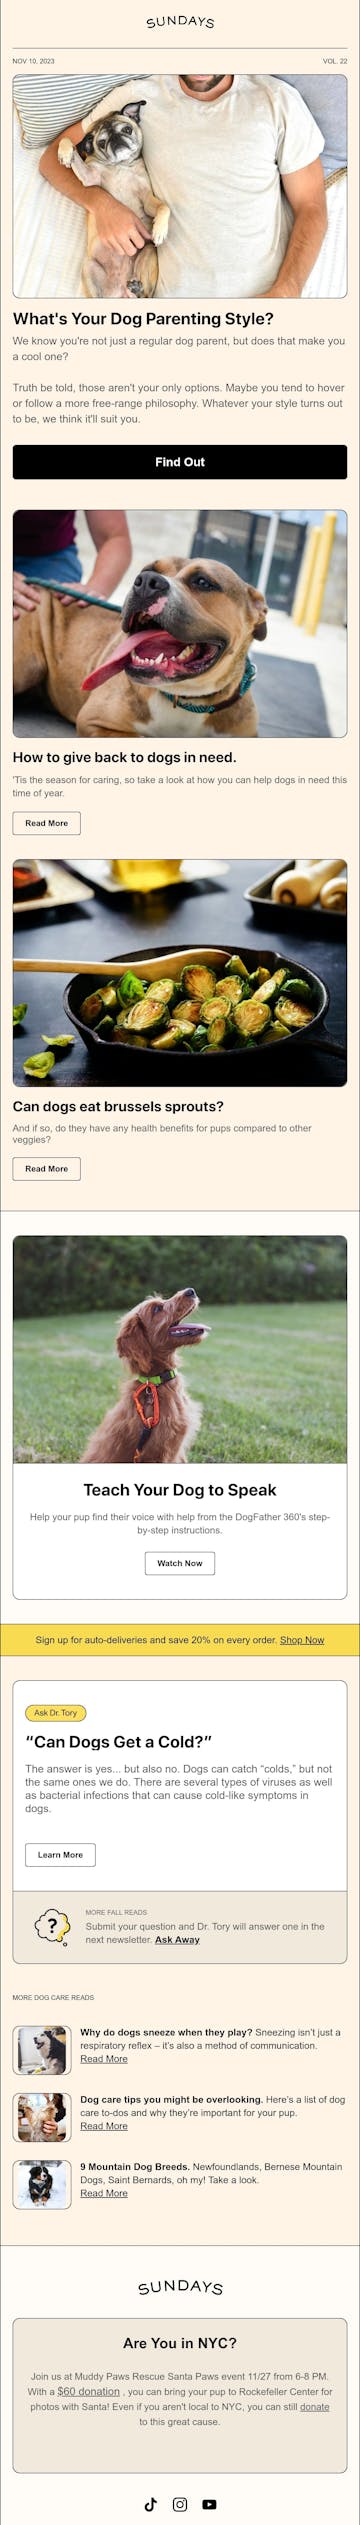 Sundays for Dogs Email Design Thumbnail Preview